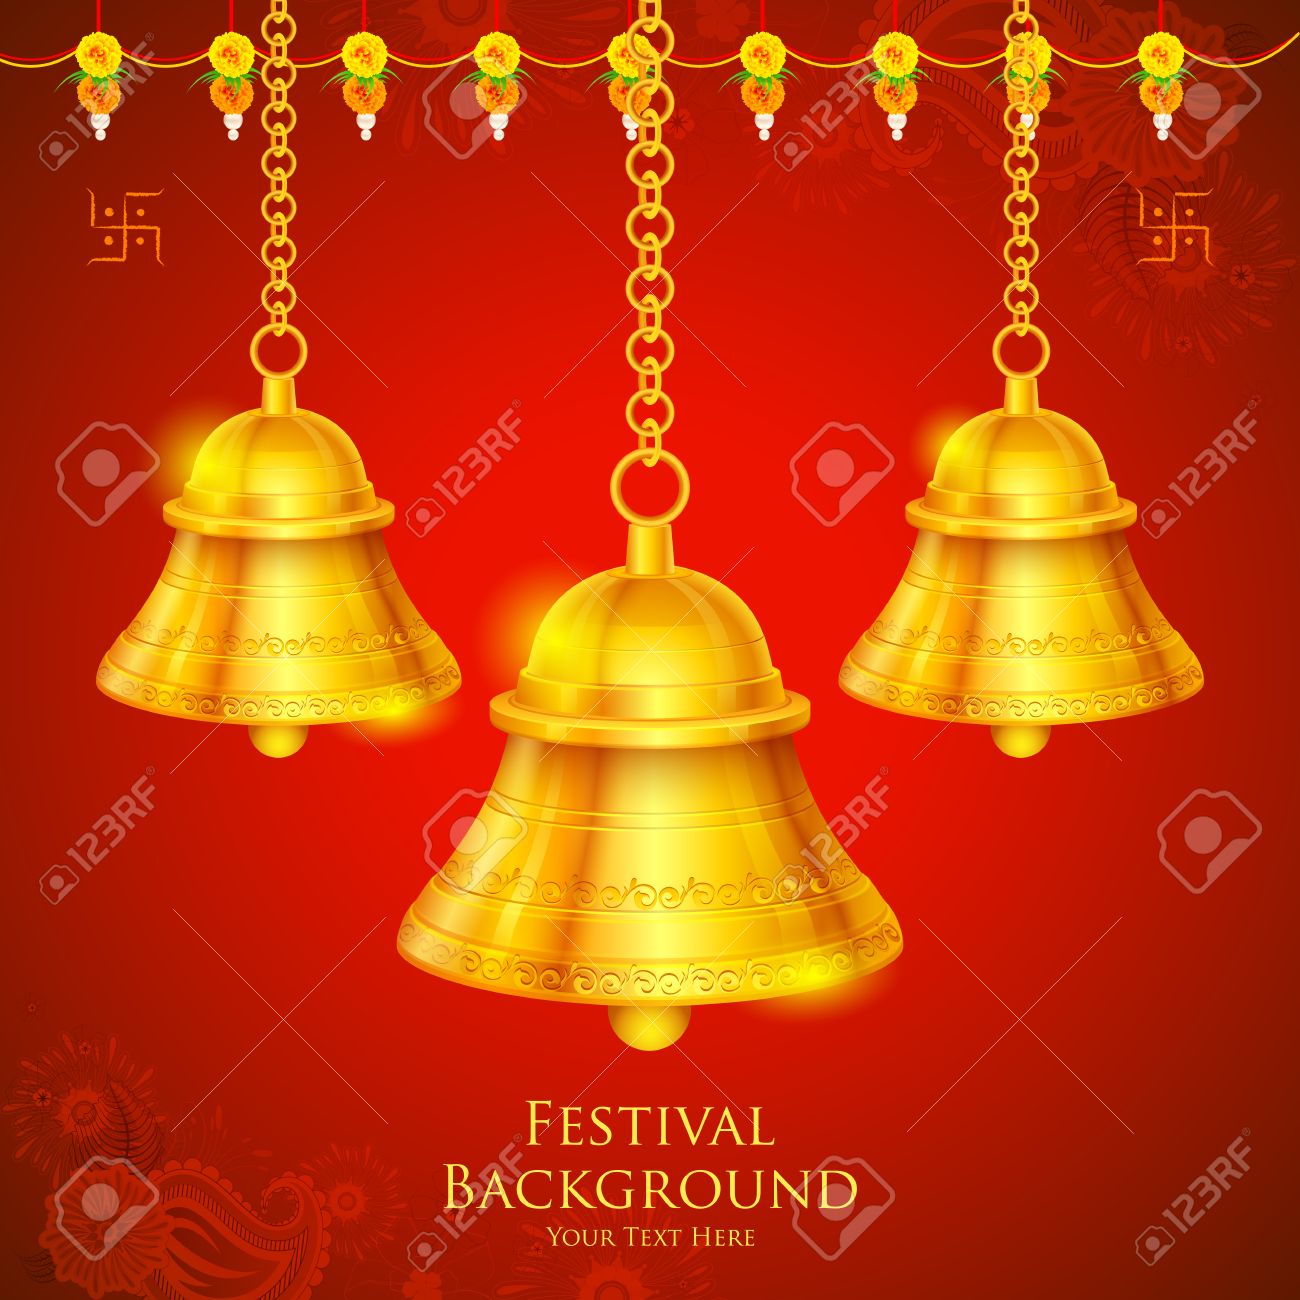 Illustration Of Temple Bell Hanging On Festival Background Royalty